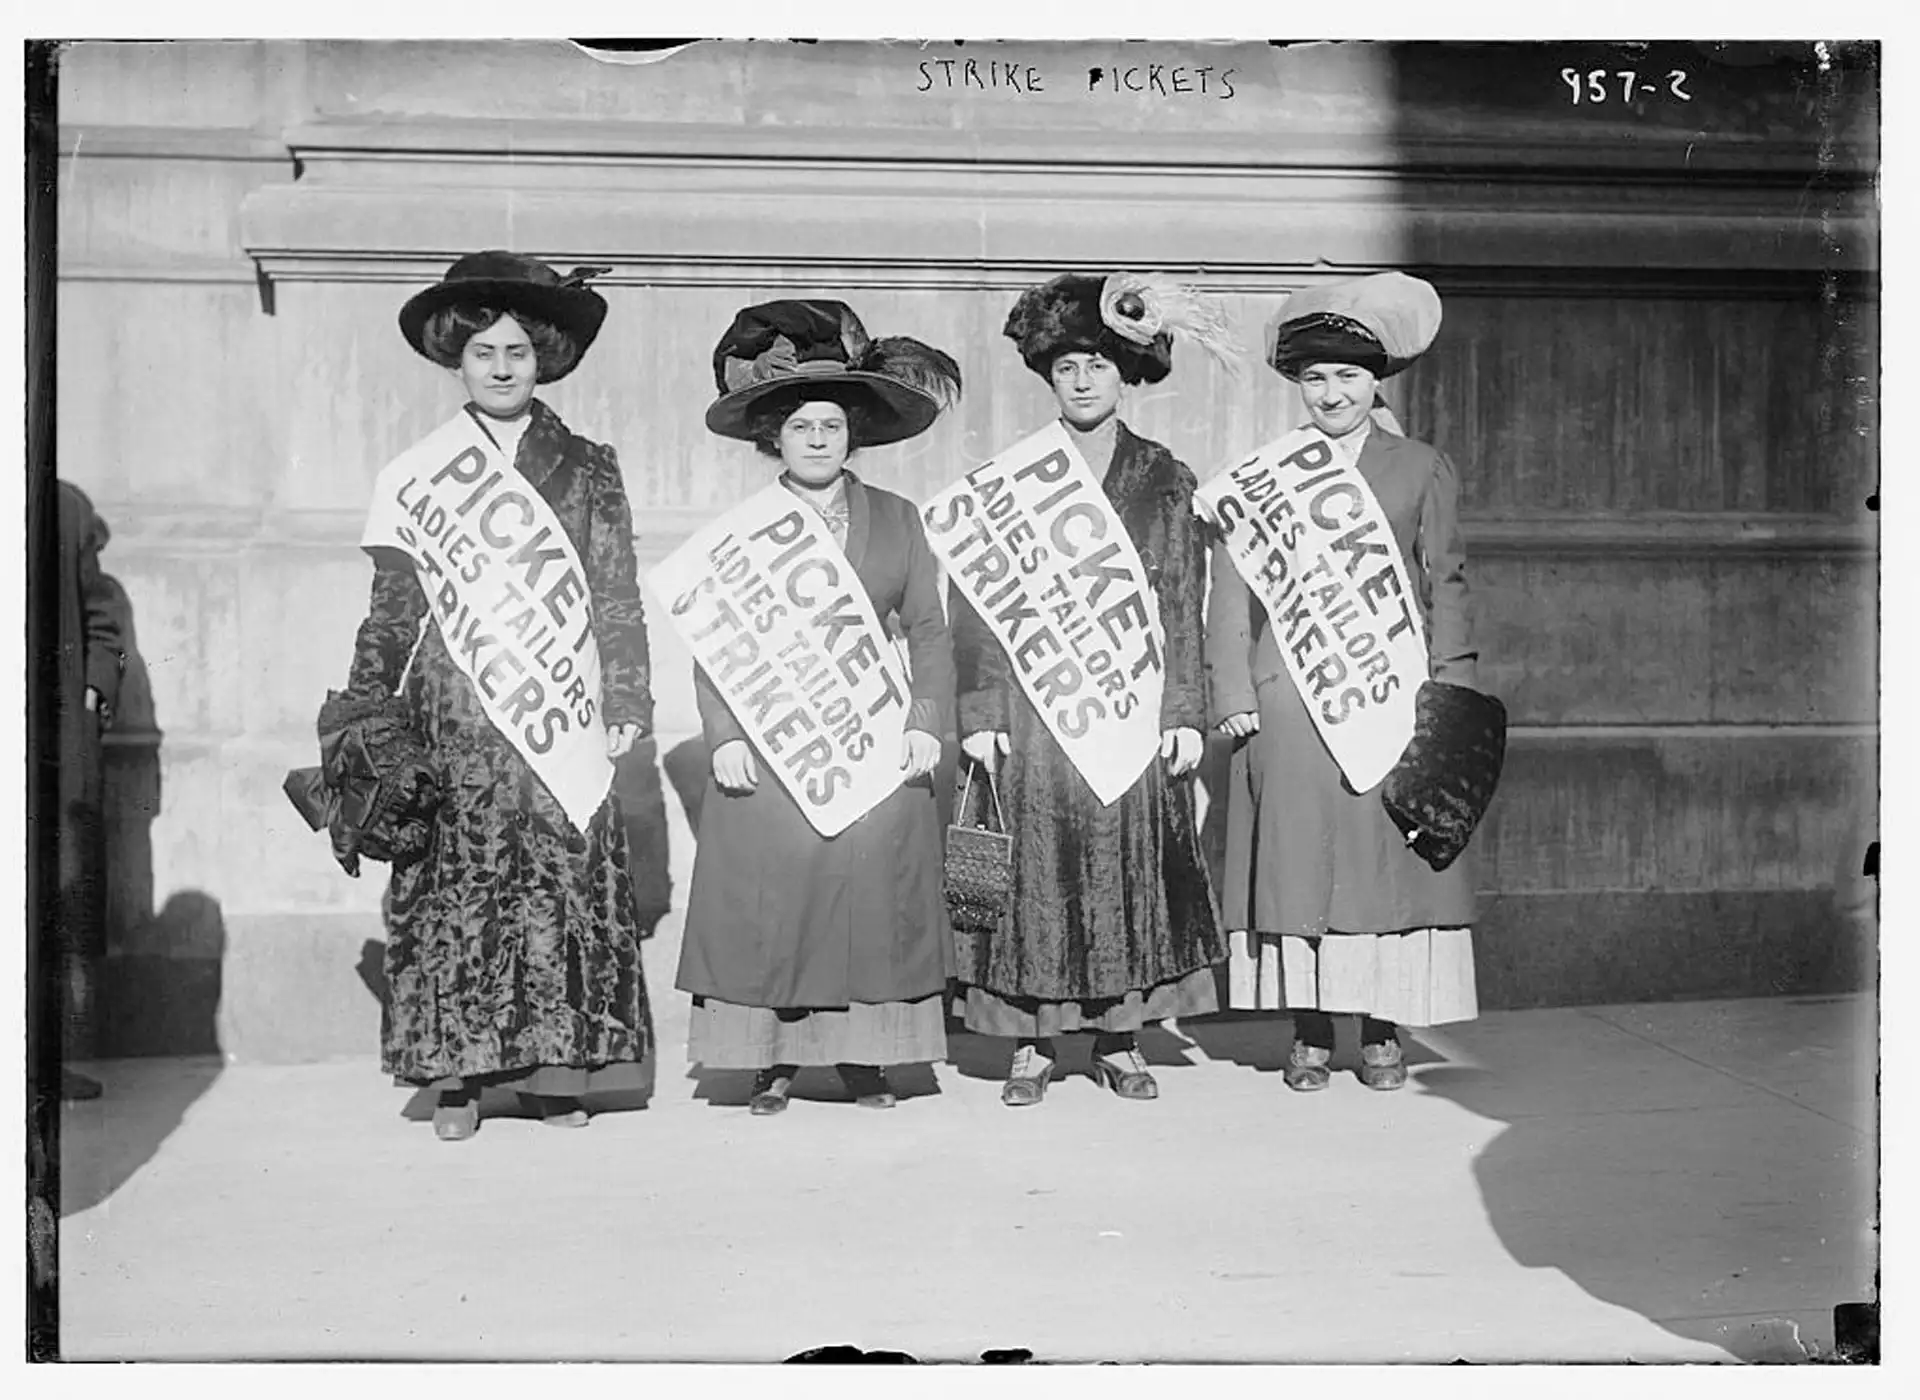 Labor rights mobilized women during suffrage — and now - The 19th